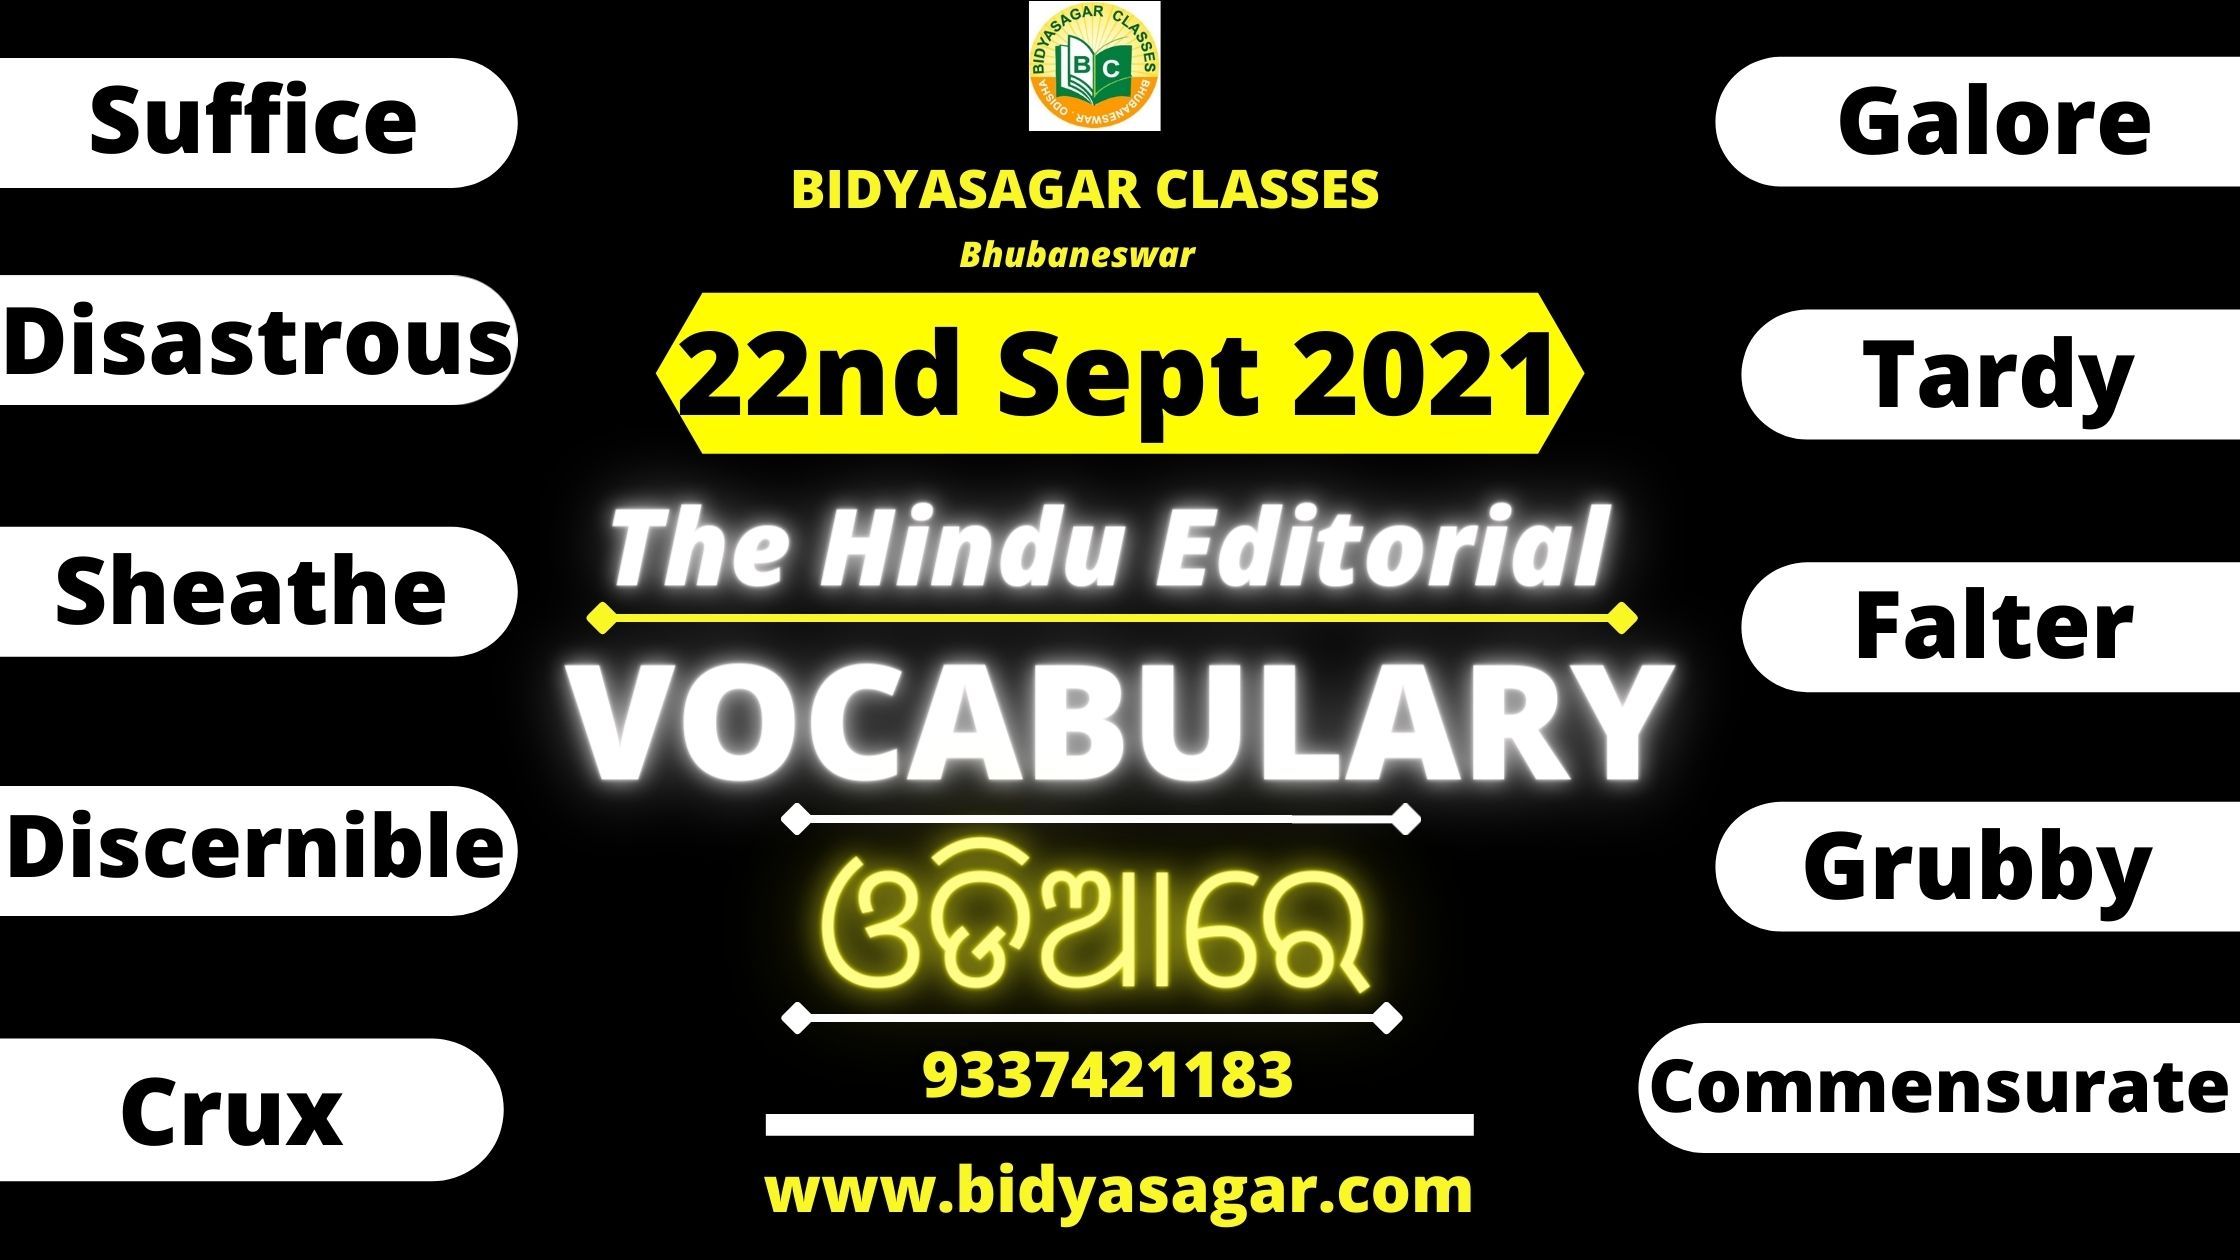 The Hindu Editorial Vocabulary of 22nd September 2021